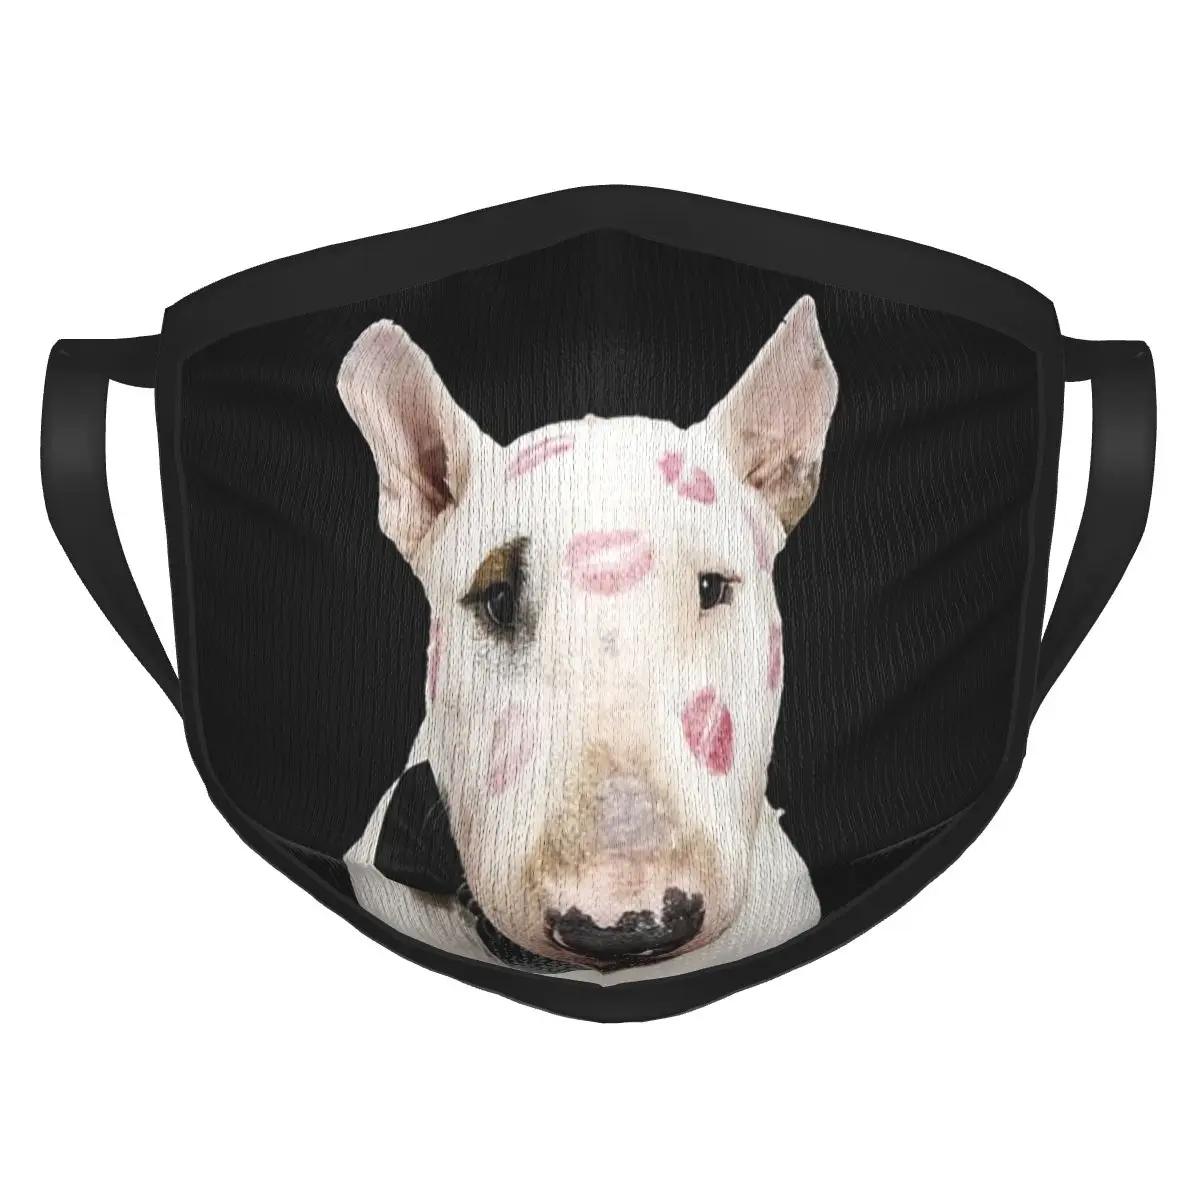 

Terrier Cute Dog Animal Canine Pets Face Mask Reusable Washable Breathable Black Border Scarf Windproof Adult Women Men present